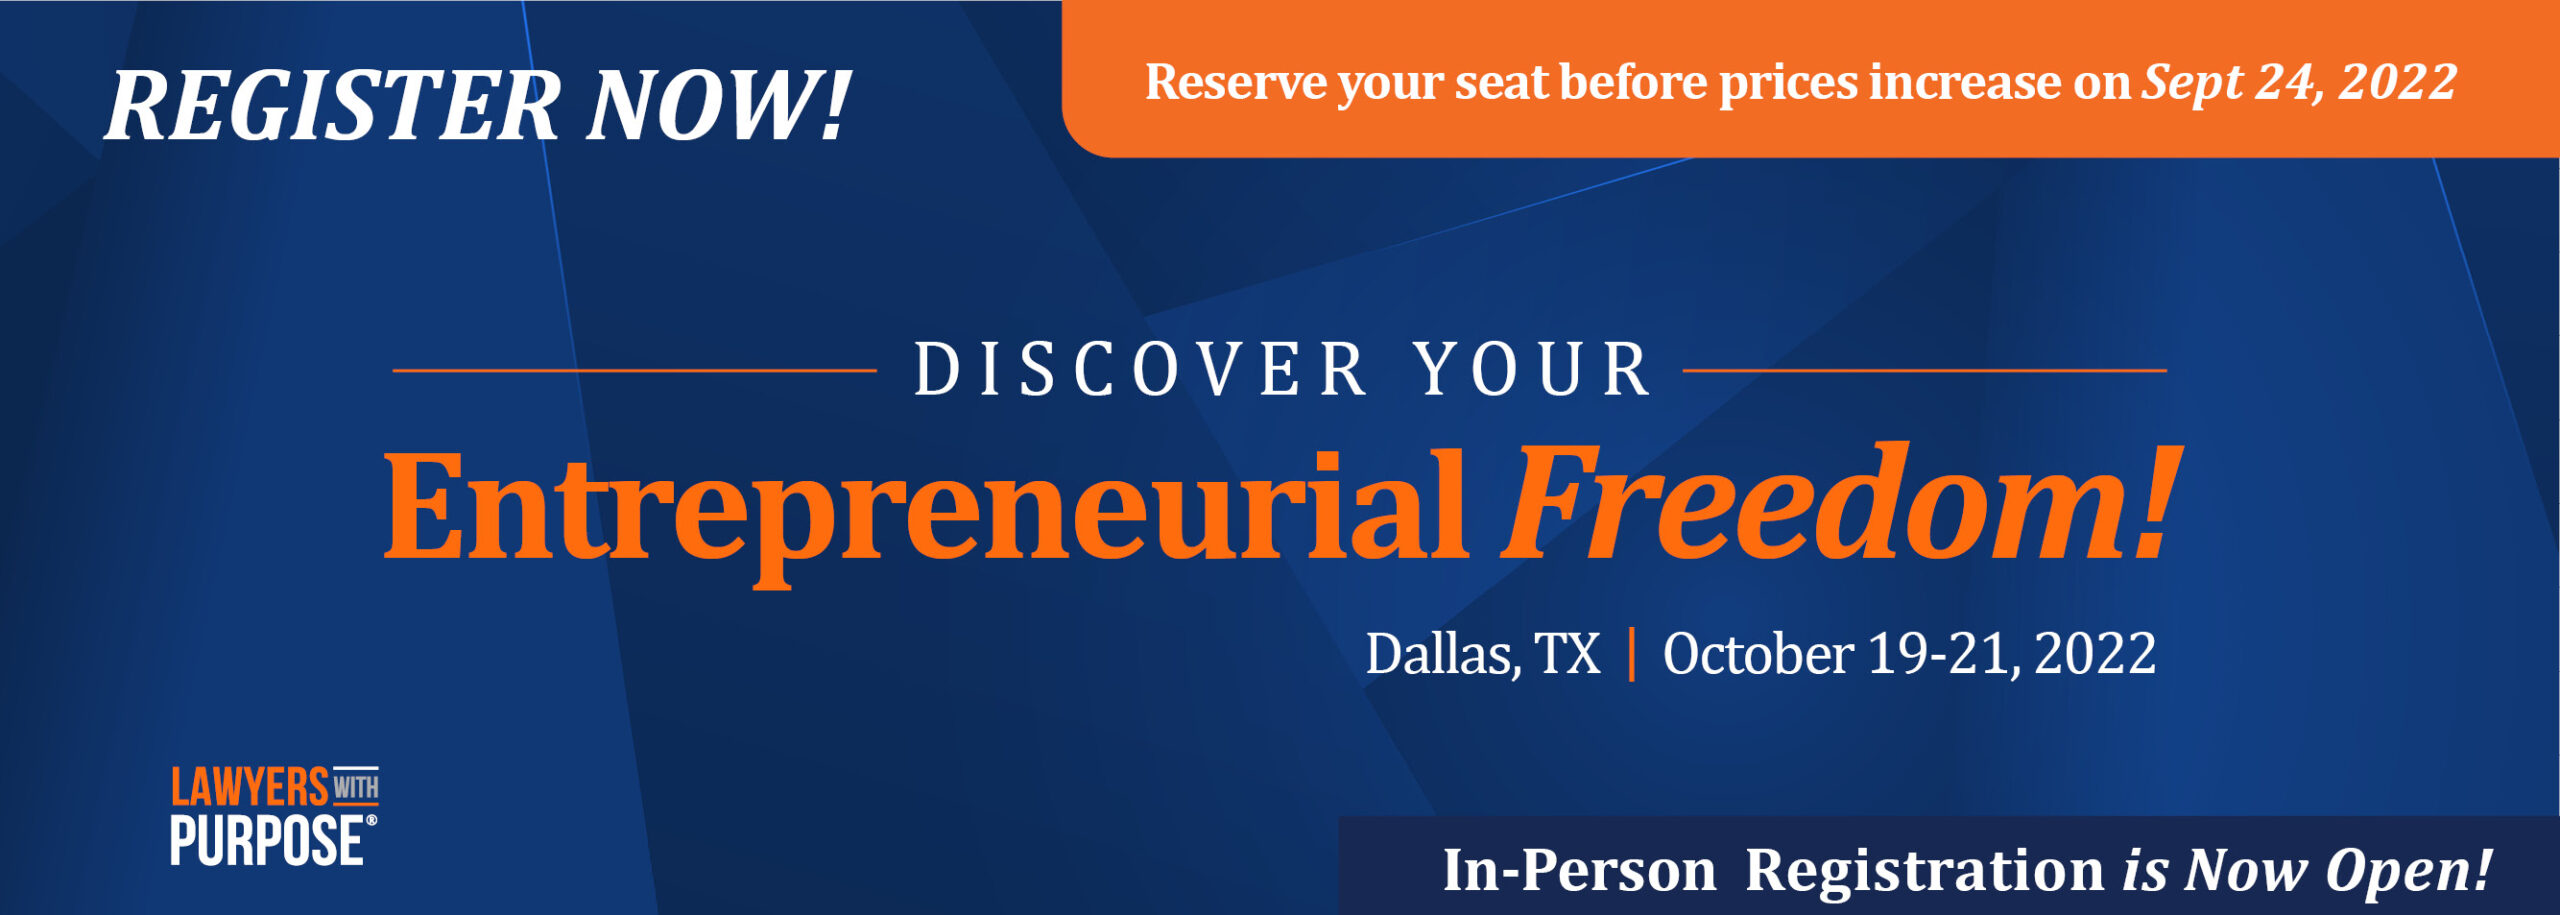 Discover Your Entrepreneurial Freedom. Reserve your seat before prices increase on Sept 24, 2022